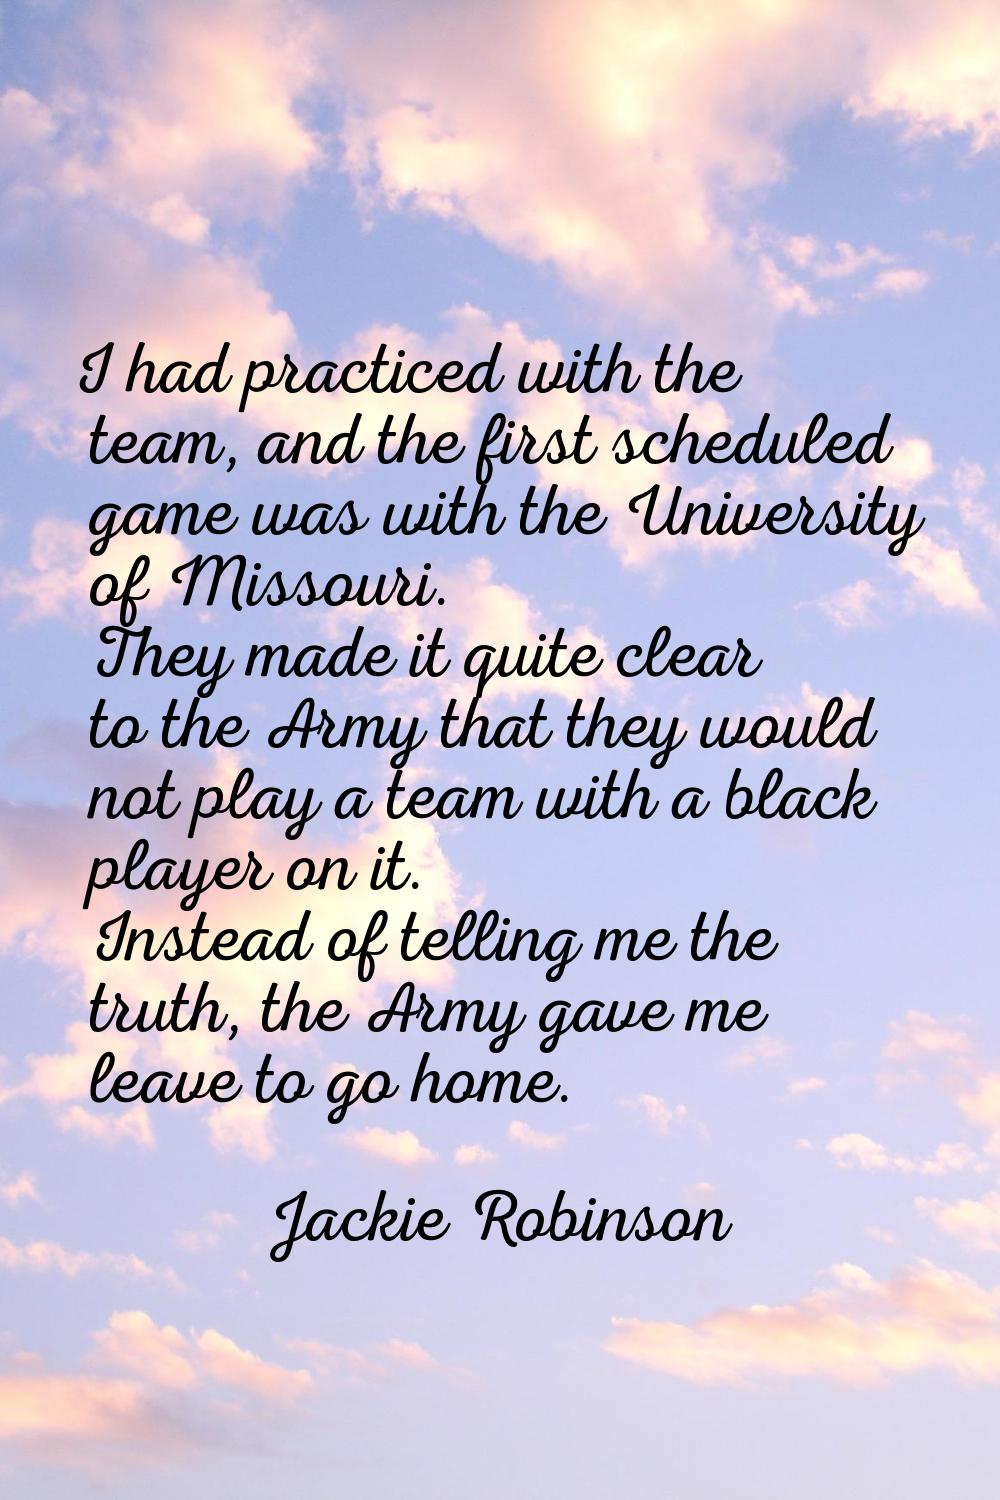 I had practiced with the team, and the first scheduled game was with the University of Missouri. Th